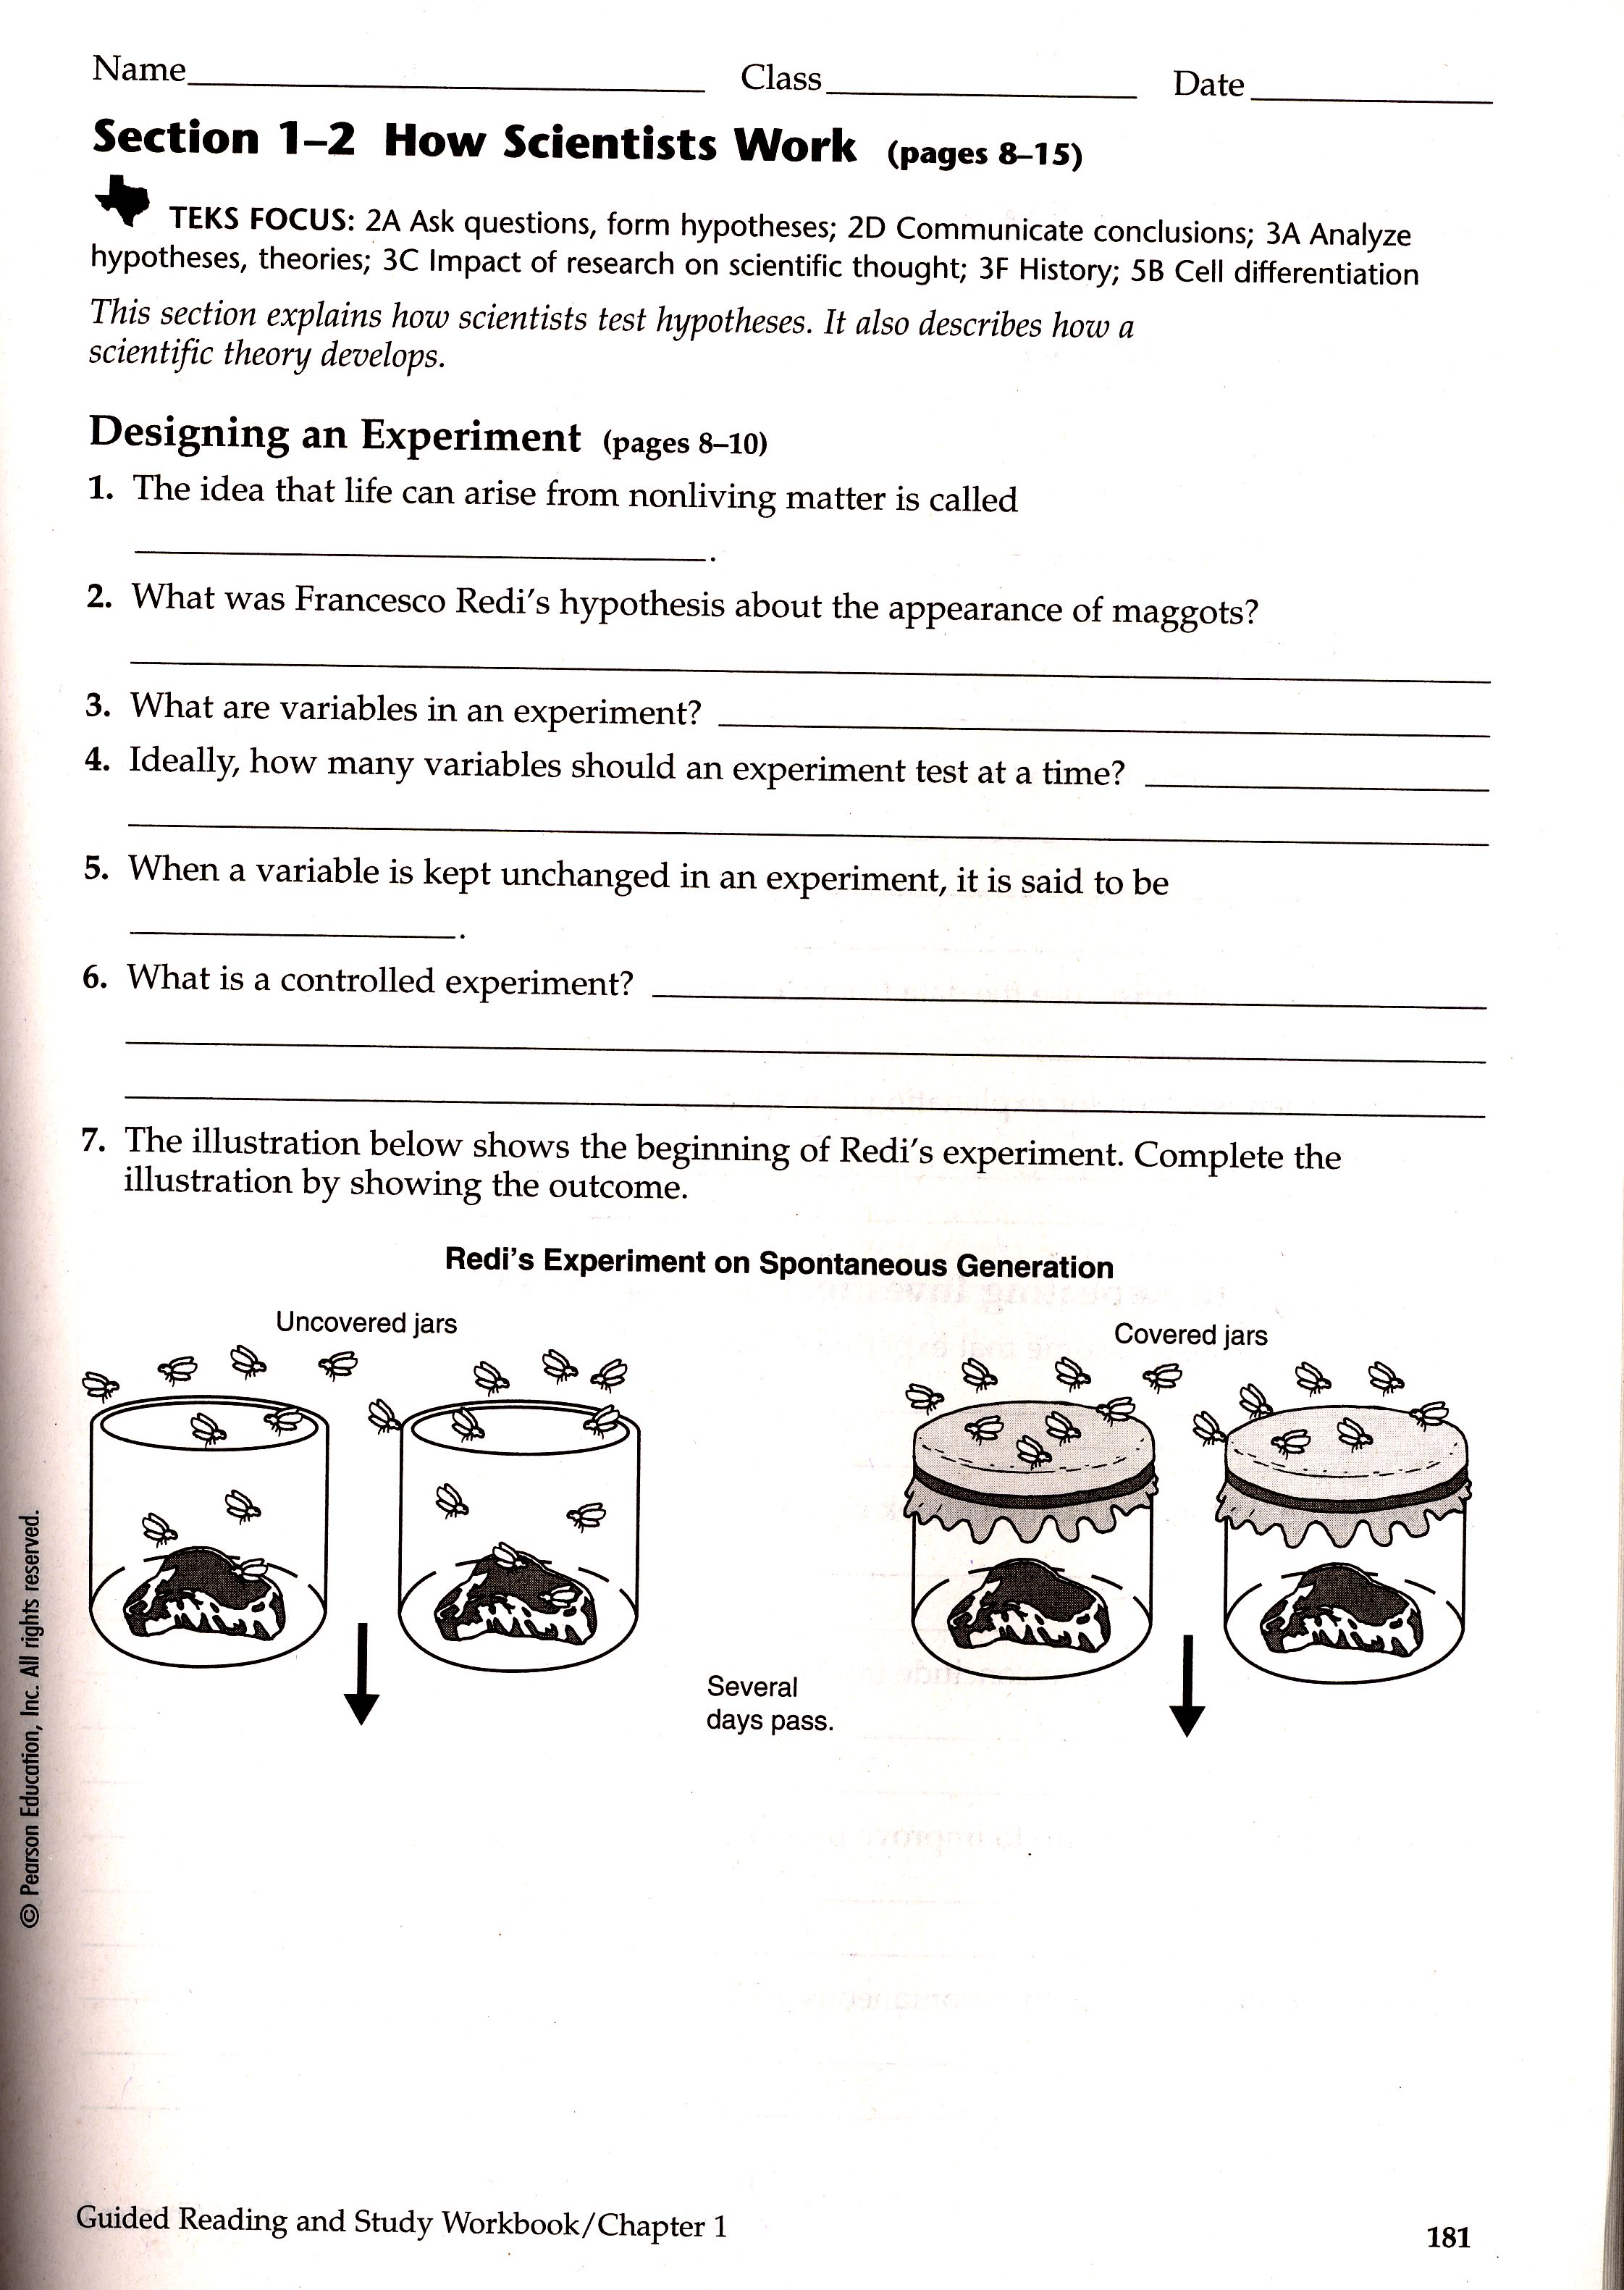 Prentice hall biology answer key chapter 9